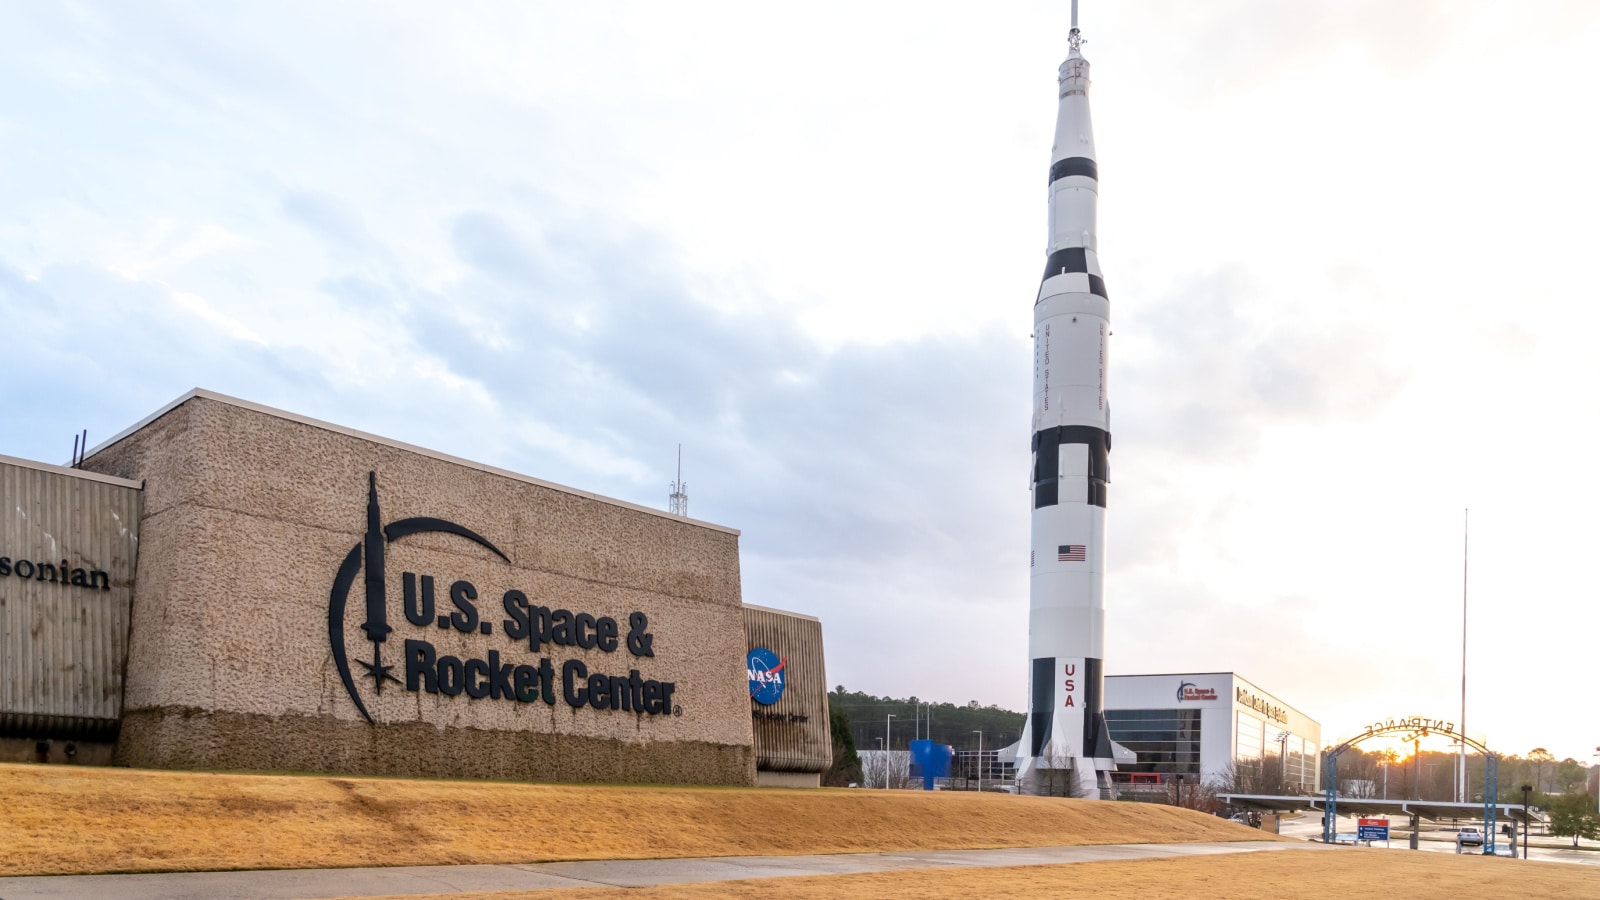 Huntsville, Alabama, USA - December 29, 2021: The exterior view of the U.S. Space and Rocket Center in Huntsville, Alabama, USA, a museum operated by the government of Alabama.